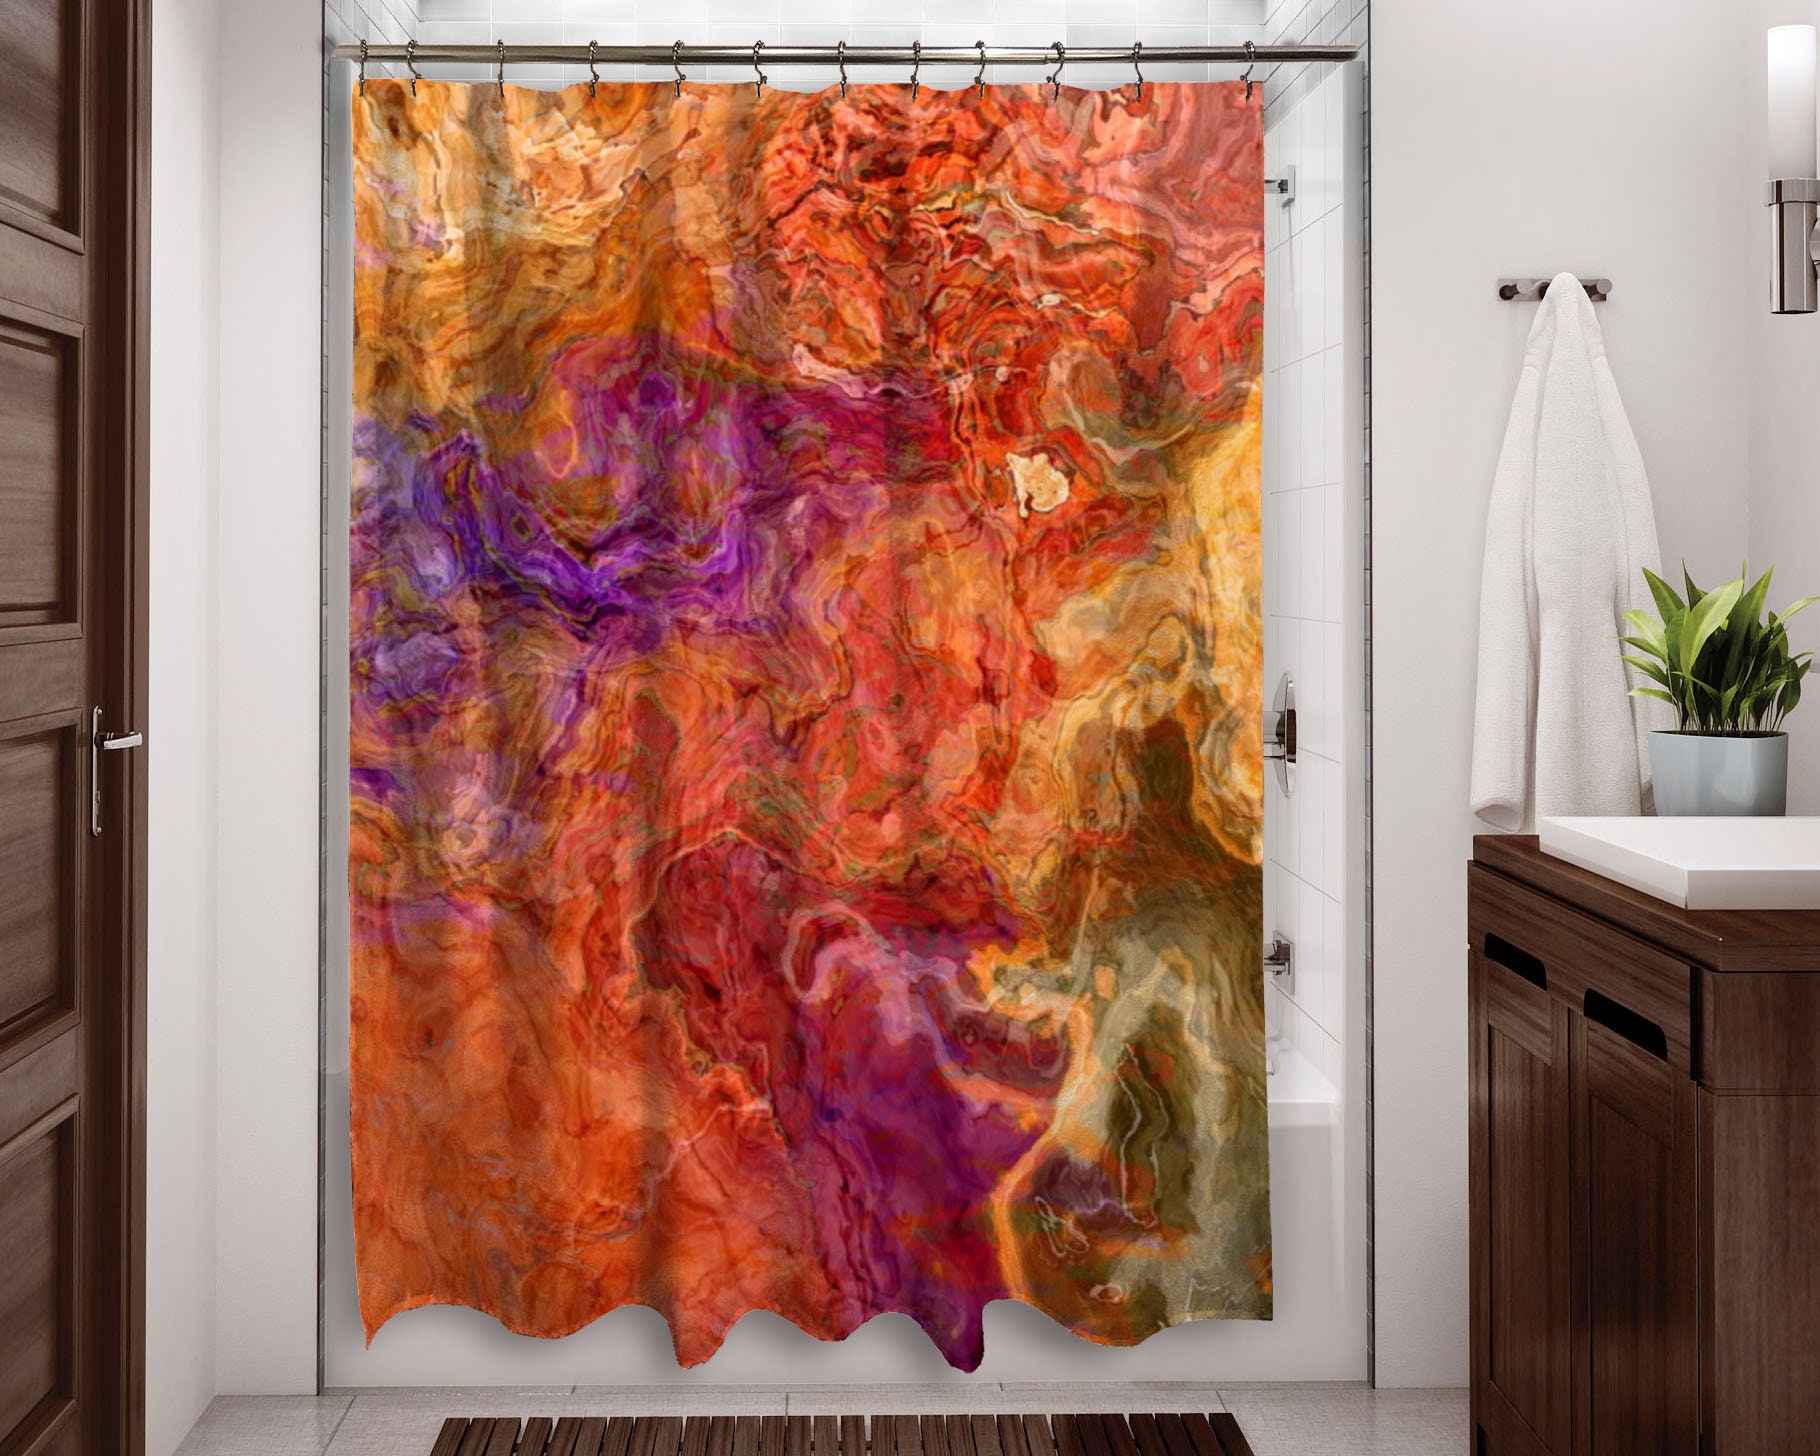 Magnificent purple and red shower curtain Contemporary Shower Curtain Abstract Art Bathroom Decor Red Etsy